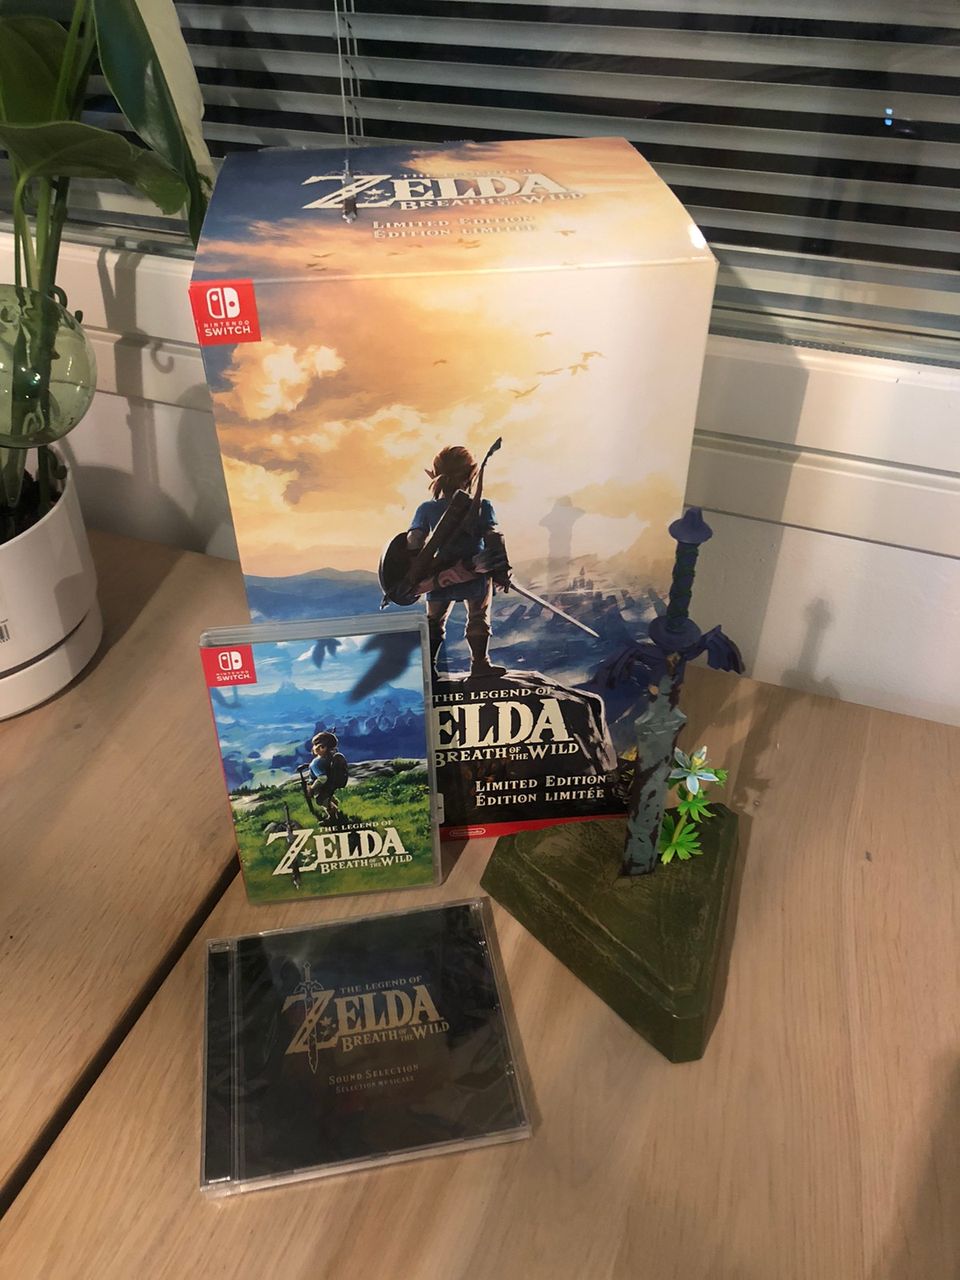 Zelda - Breath of the Wild Limited Edition (Switch)